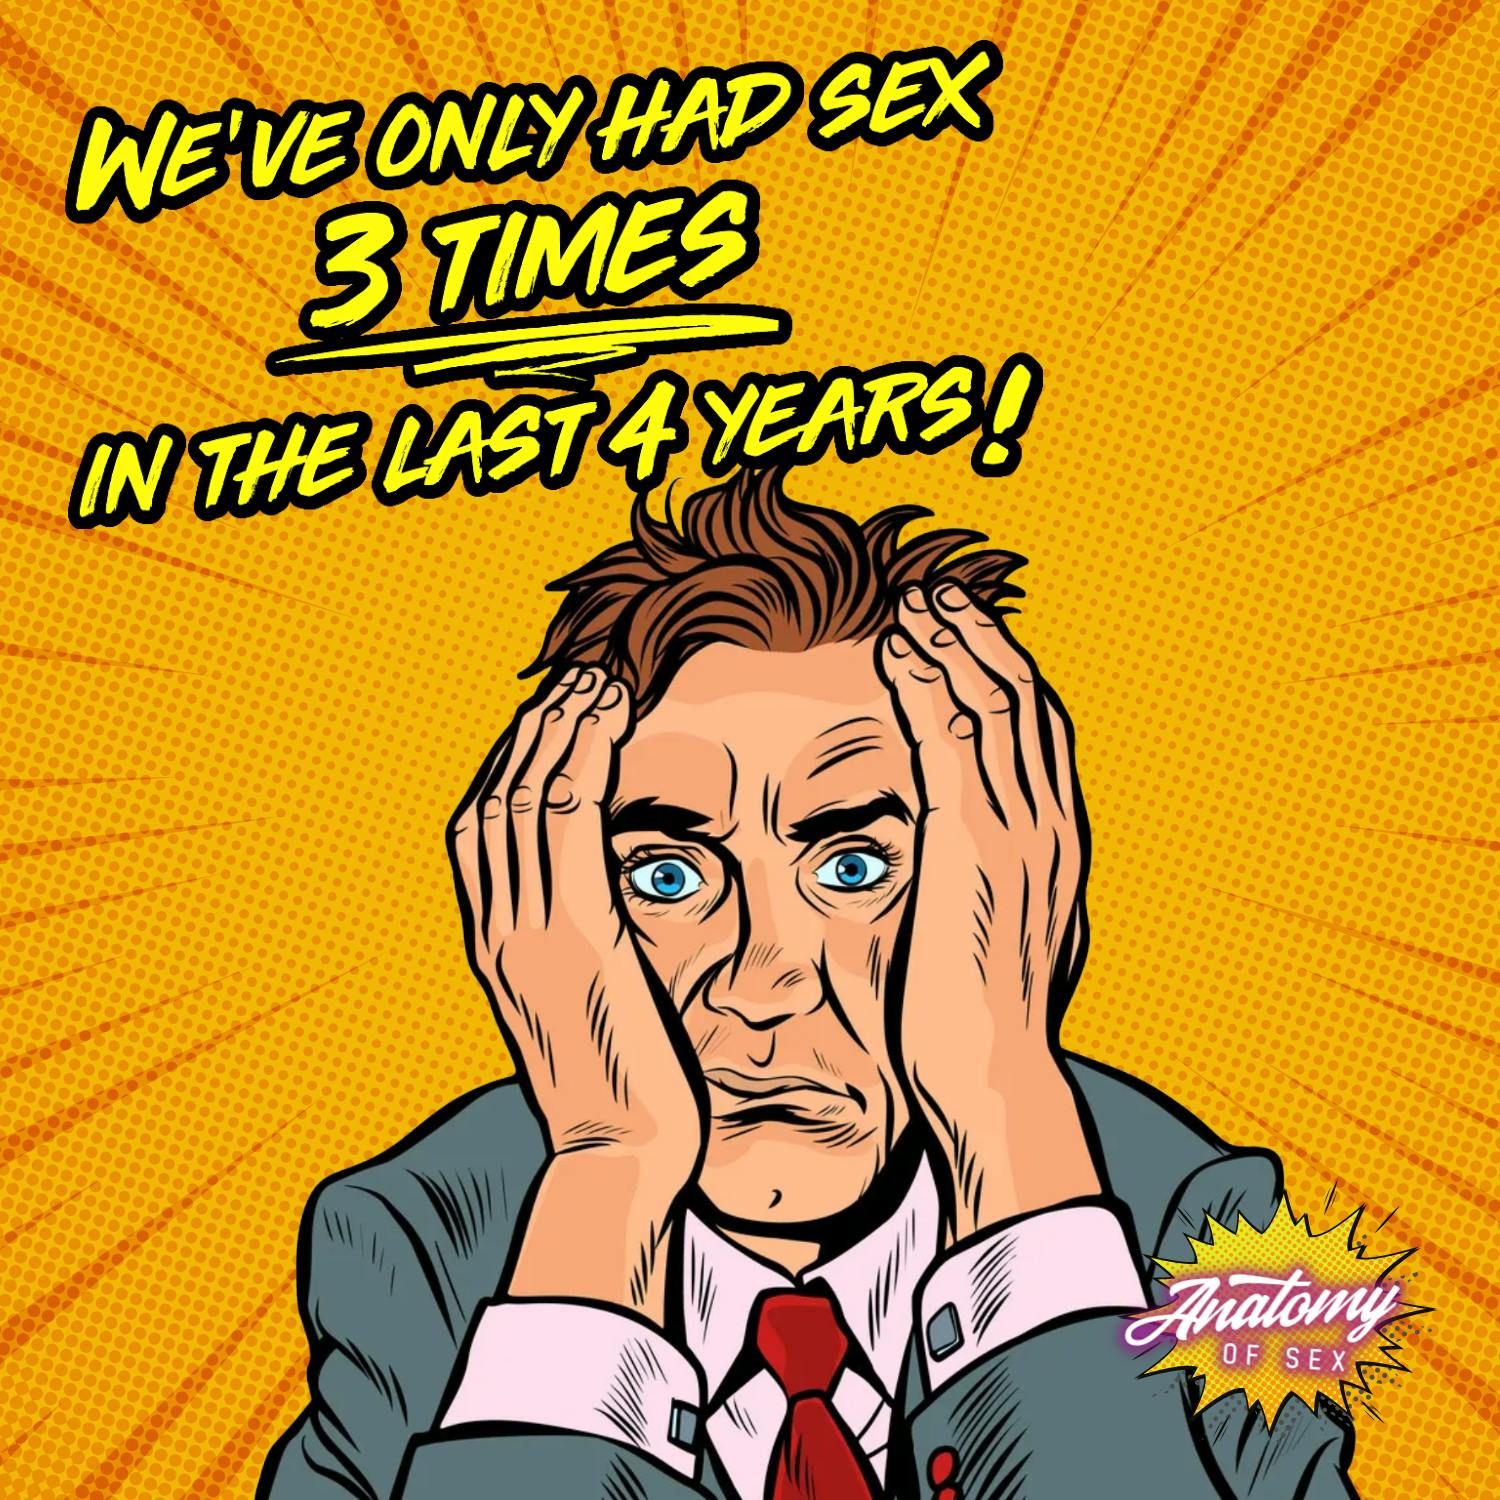 HELP! We've Only Had Sex 3 Times in the Last 4 Years!